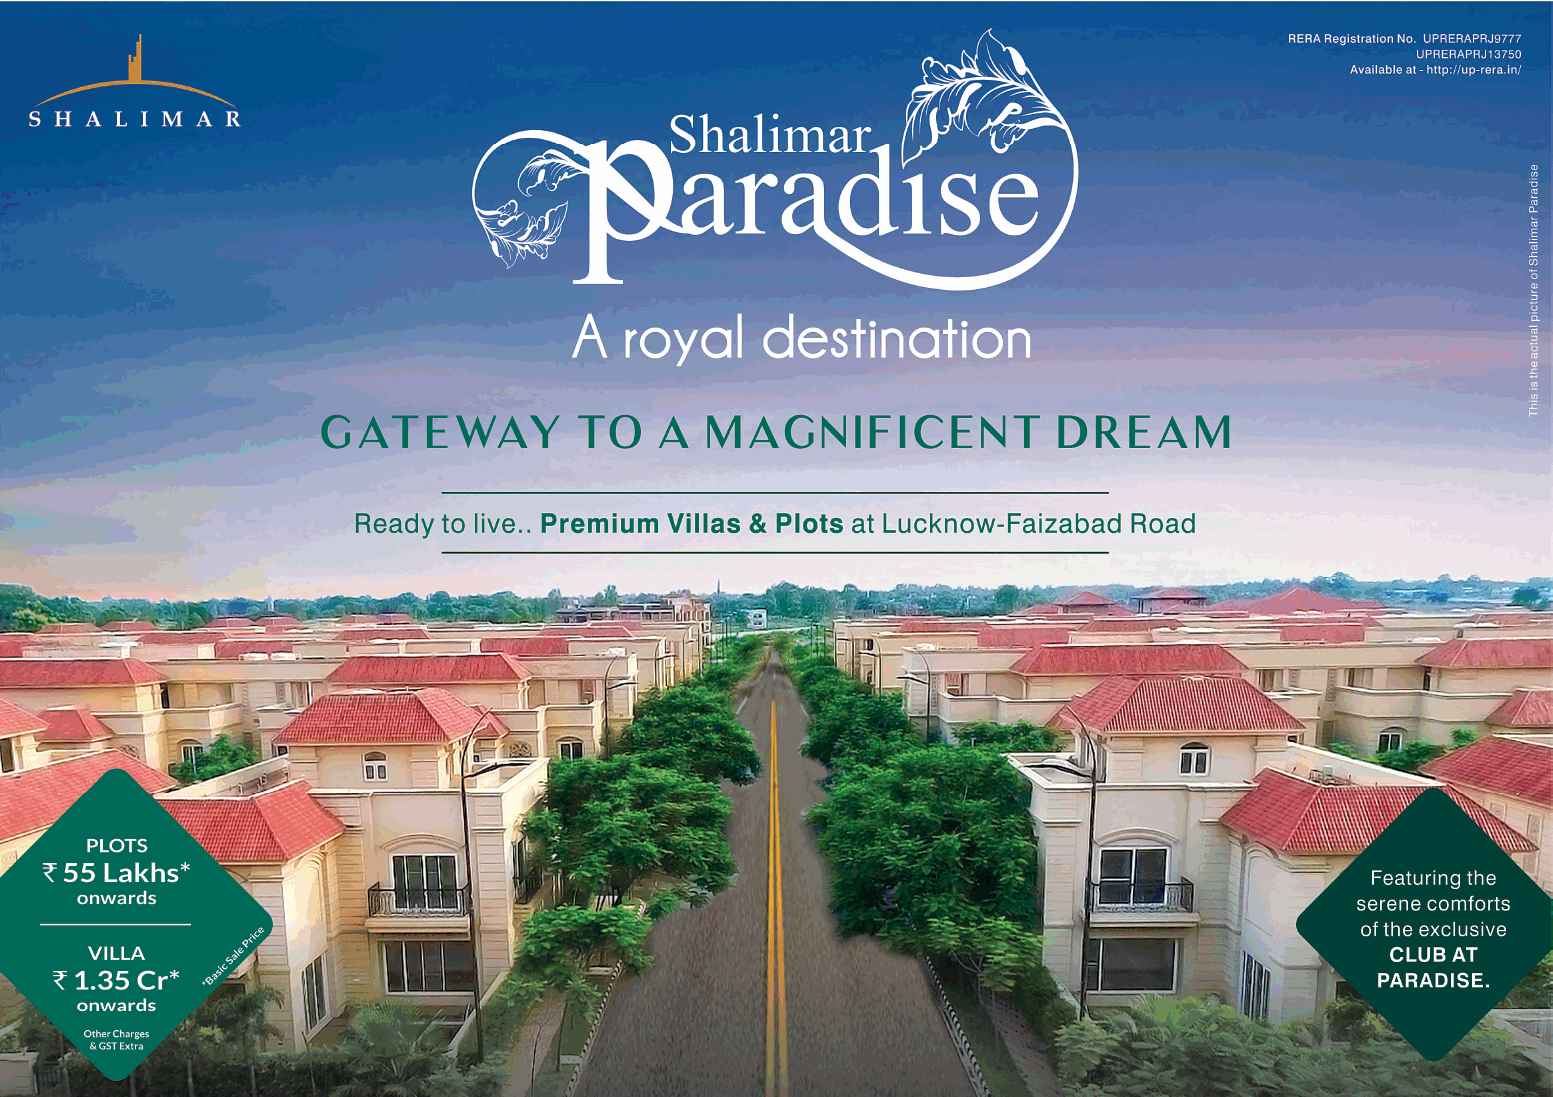 Book ready to live premium villas & plots at Shalimar Paradise in Lucknow